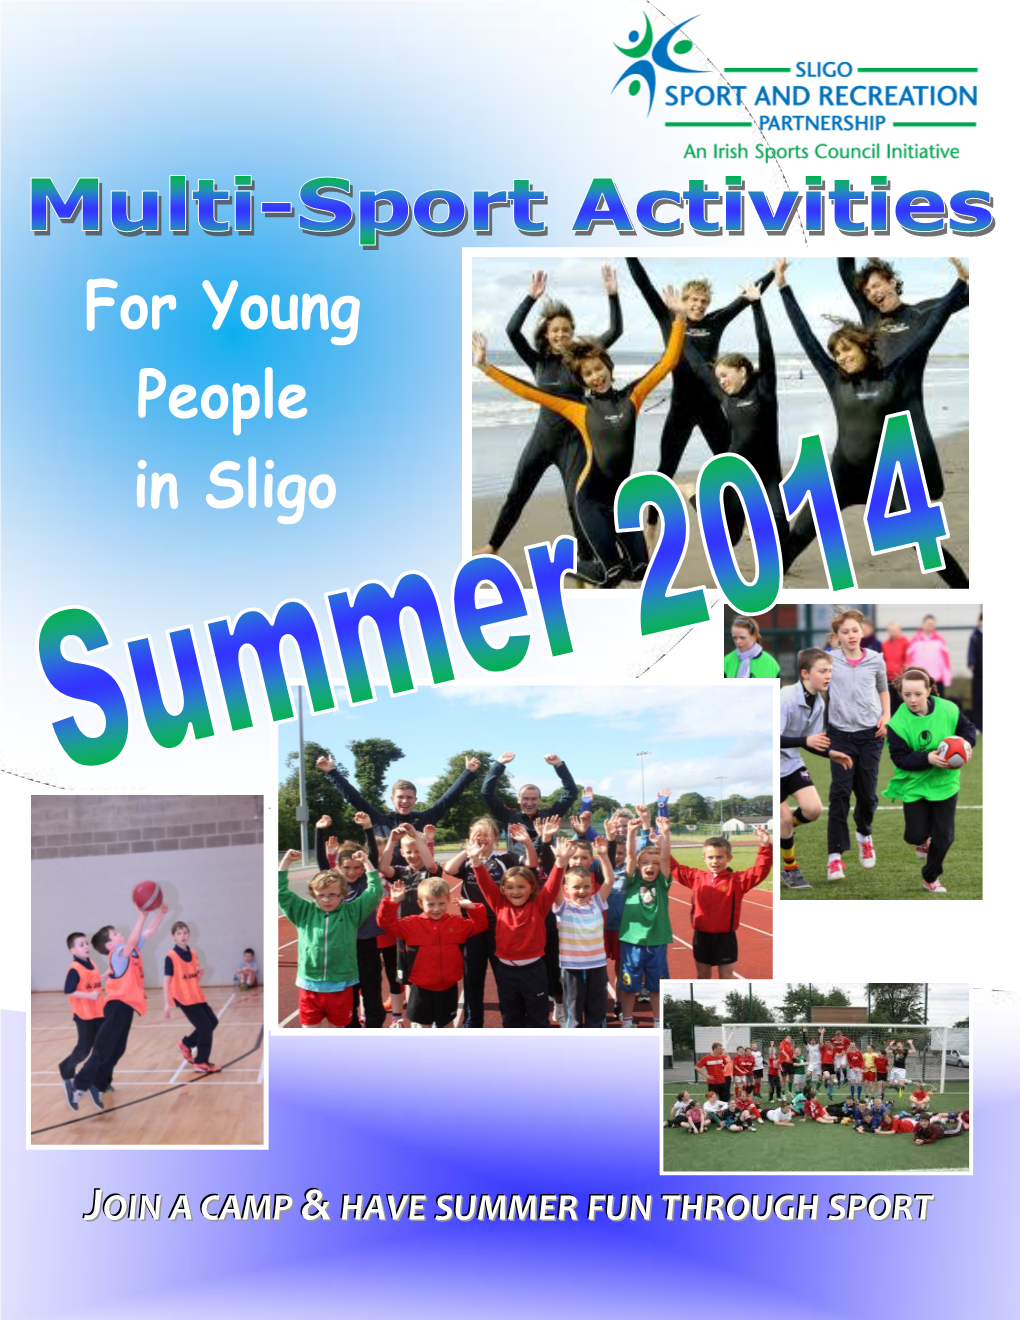 Join a Camp &Have Summer Fun Through Sport